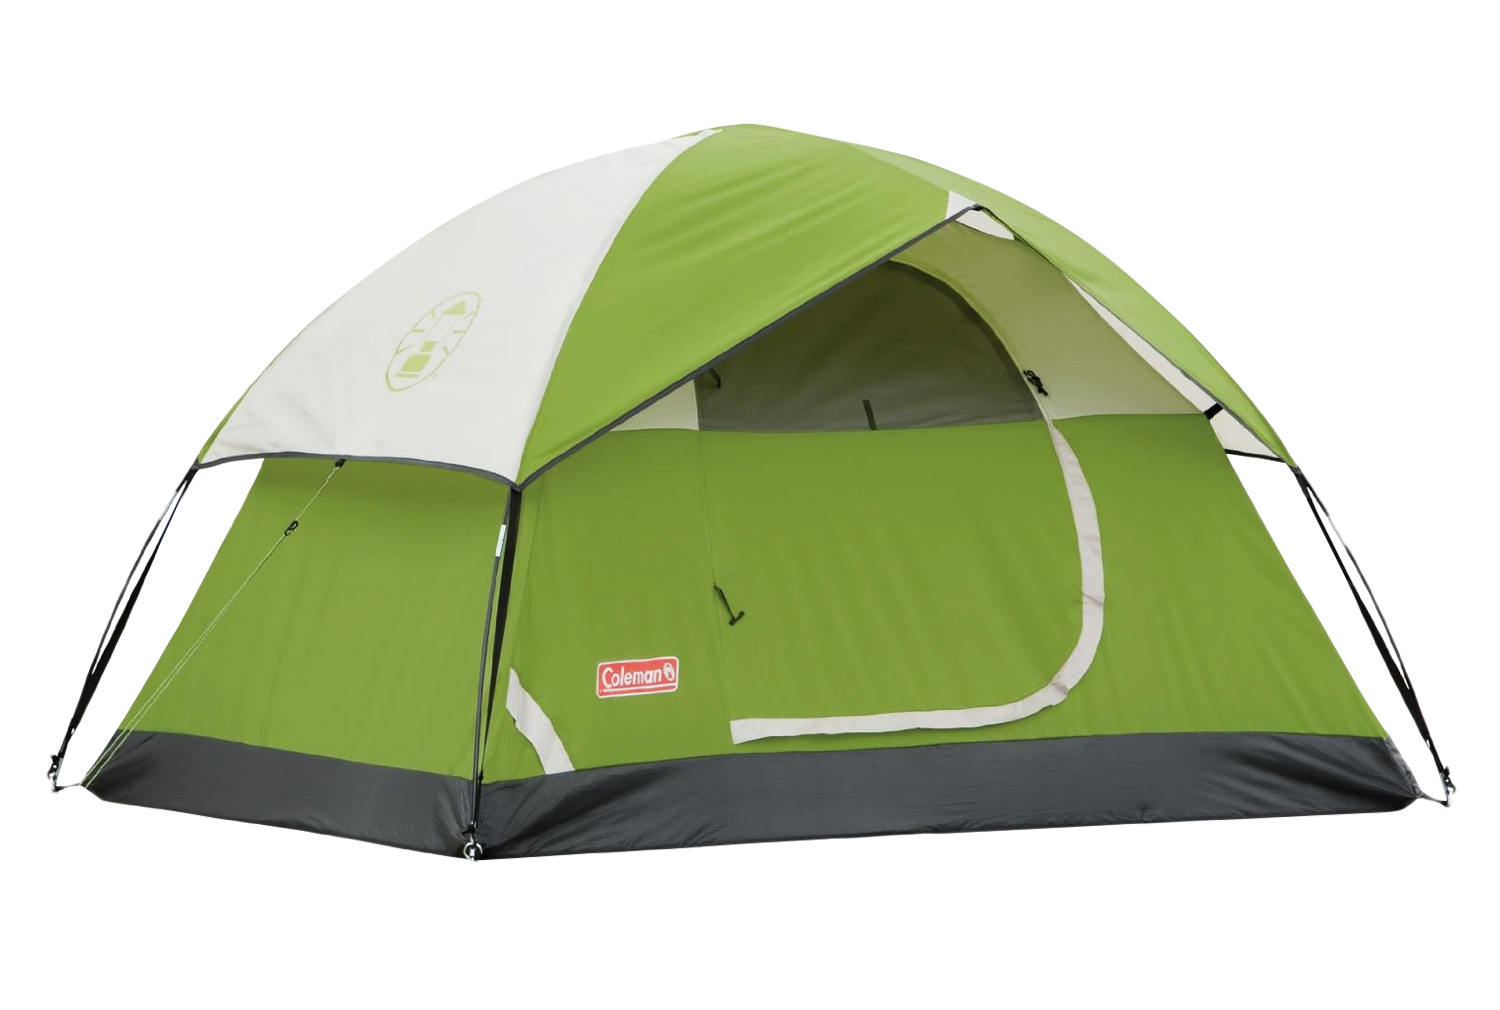 Camping Tent Download PNG Image